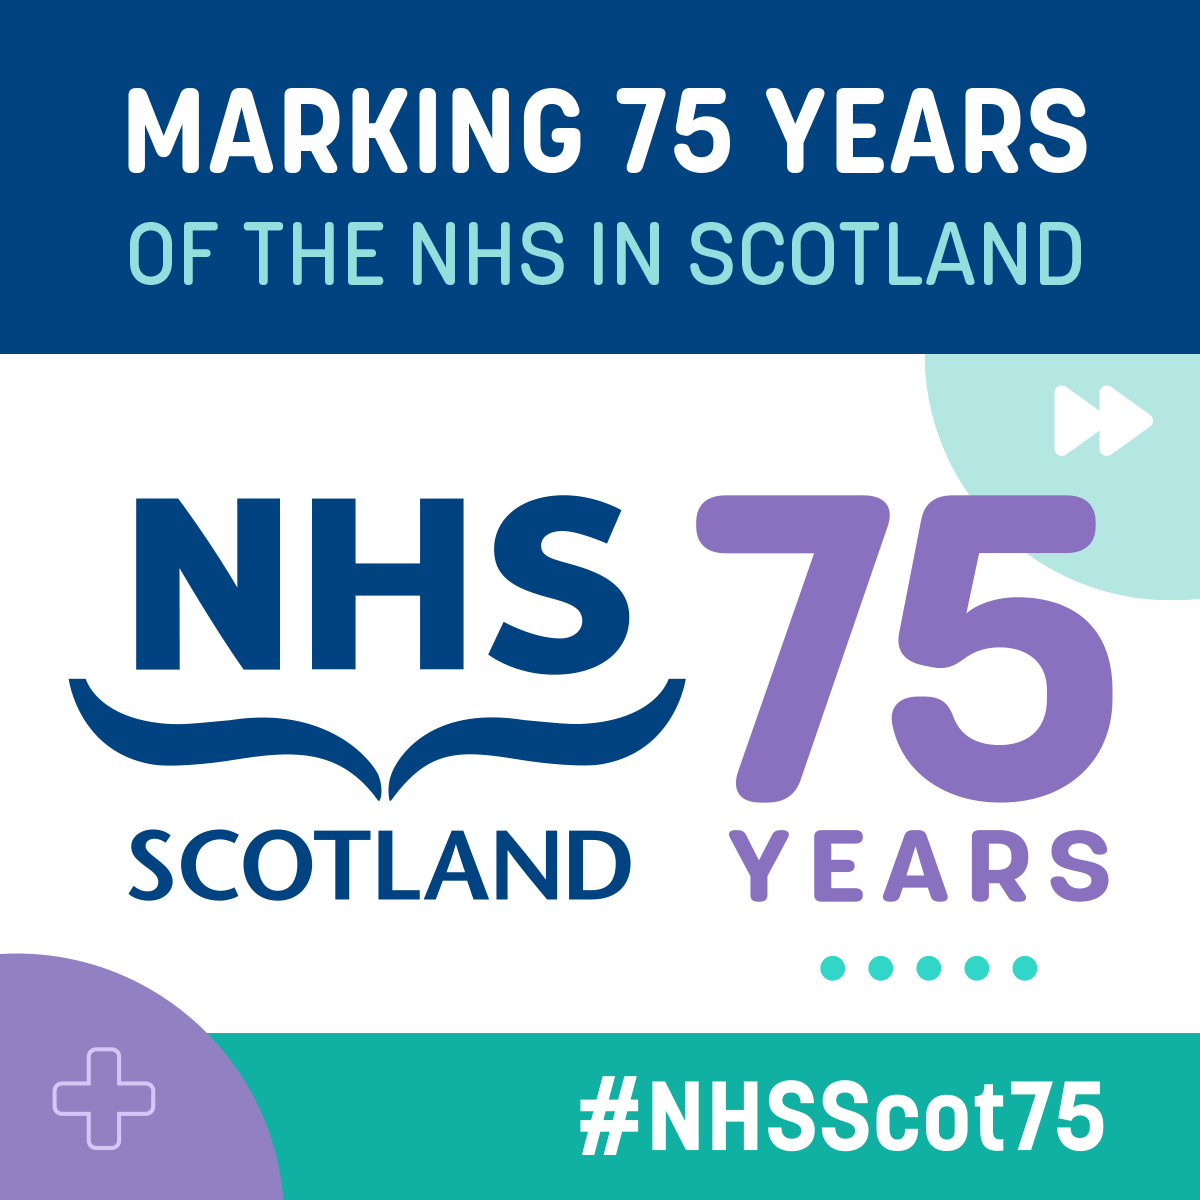 How the NHS came into being in Scotland is a story that isn't widely known. It had its own strong and distinctively Scottish roots well before 1948. Find out more at ournhsscotland.com/history #nhsscot75